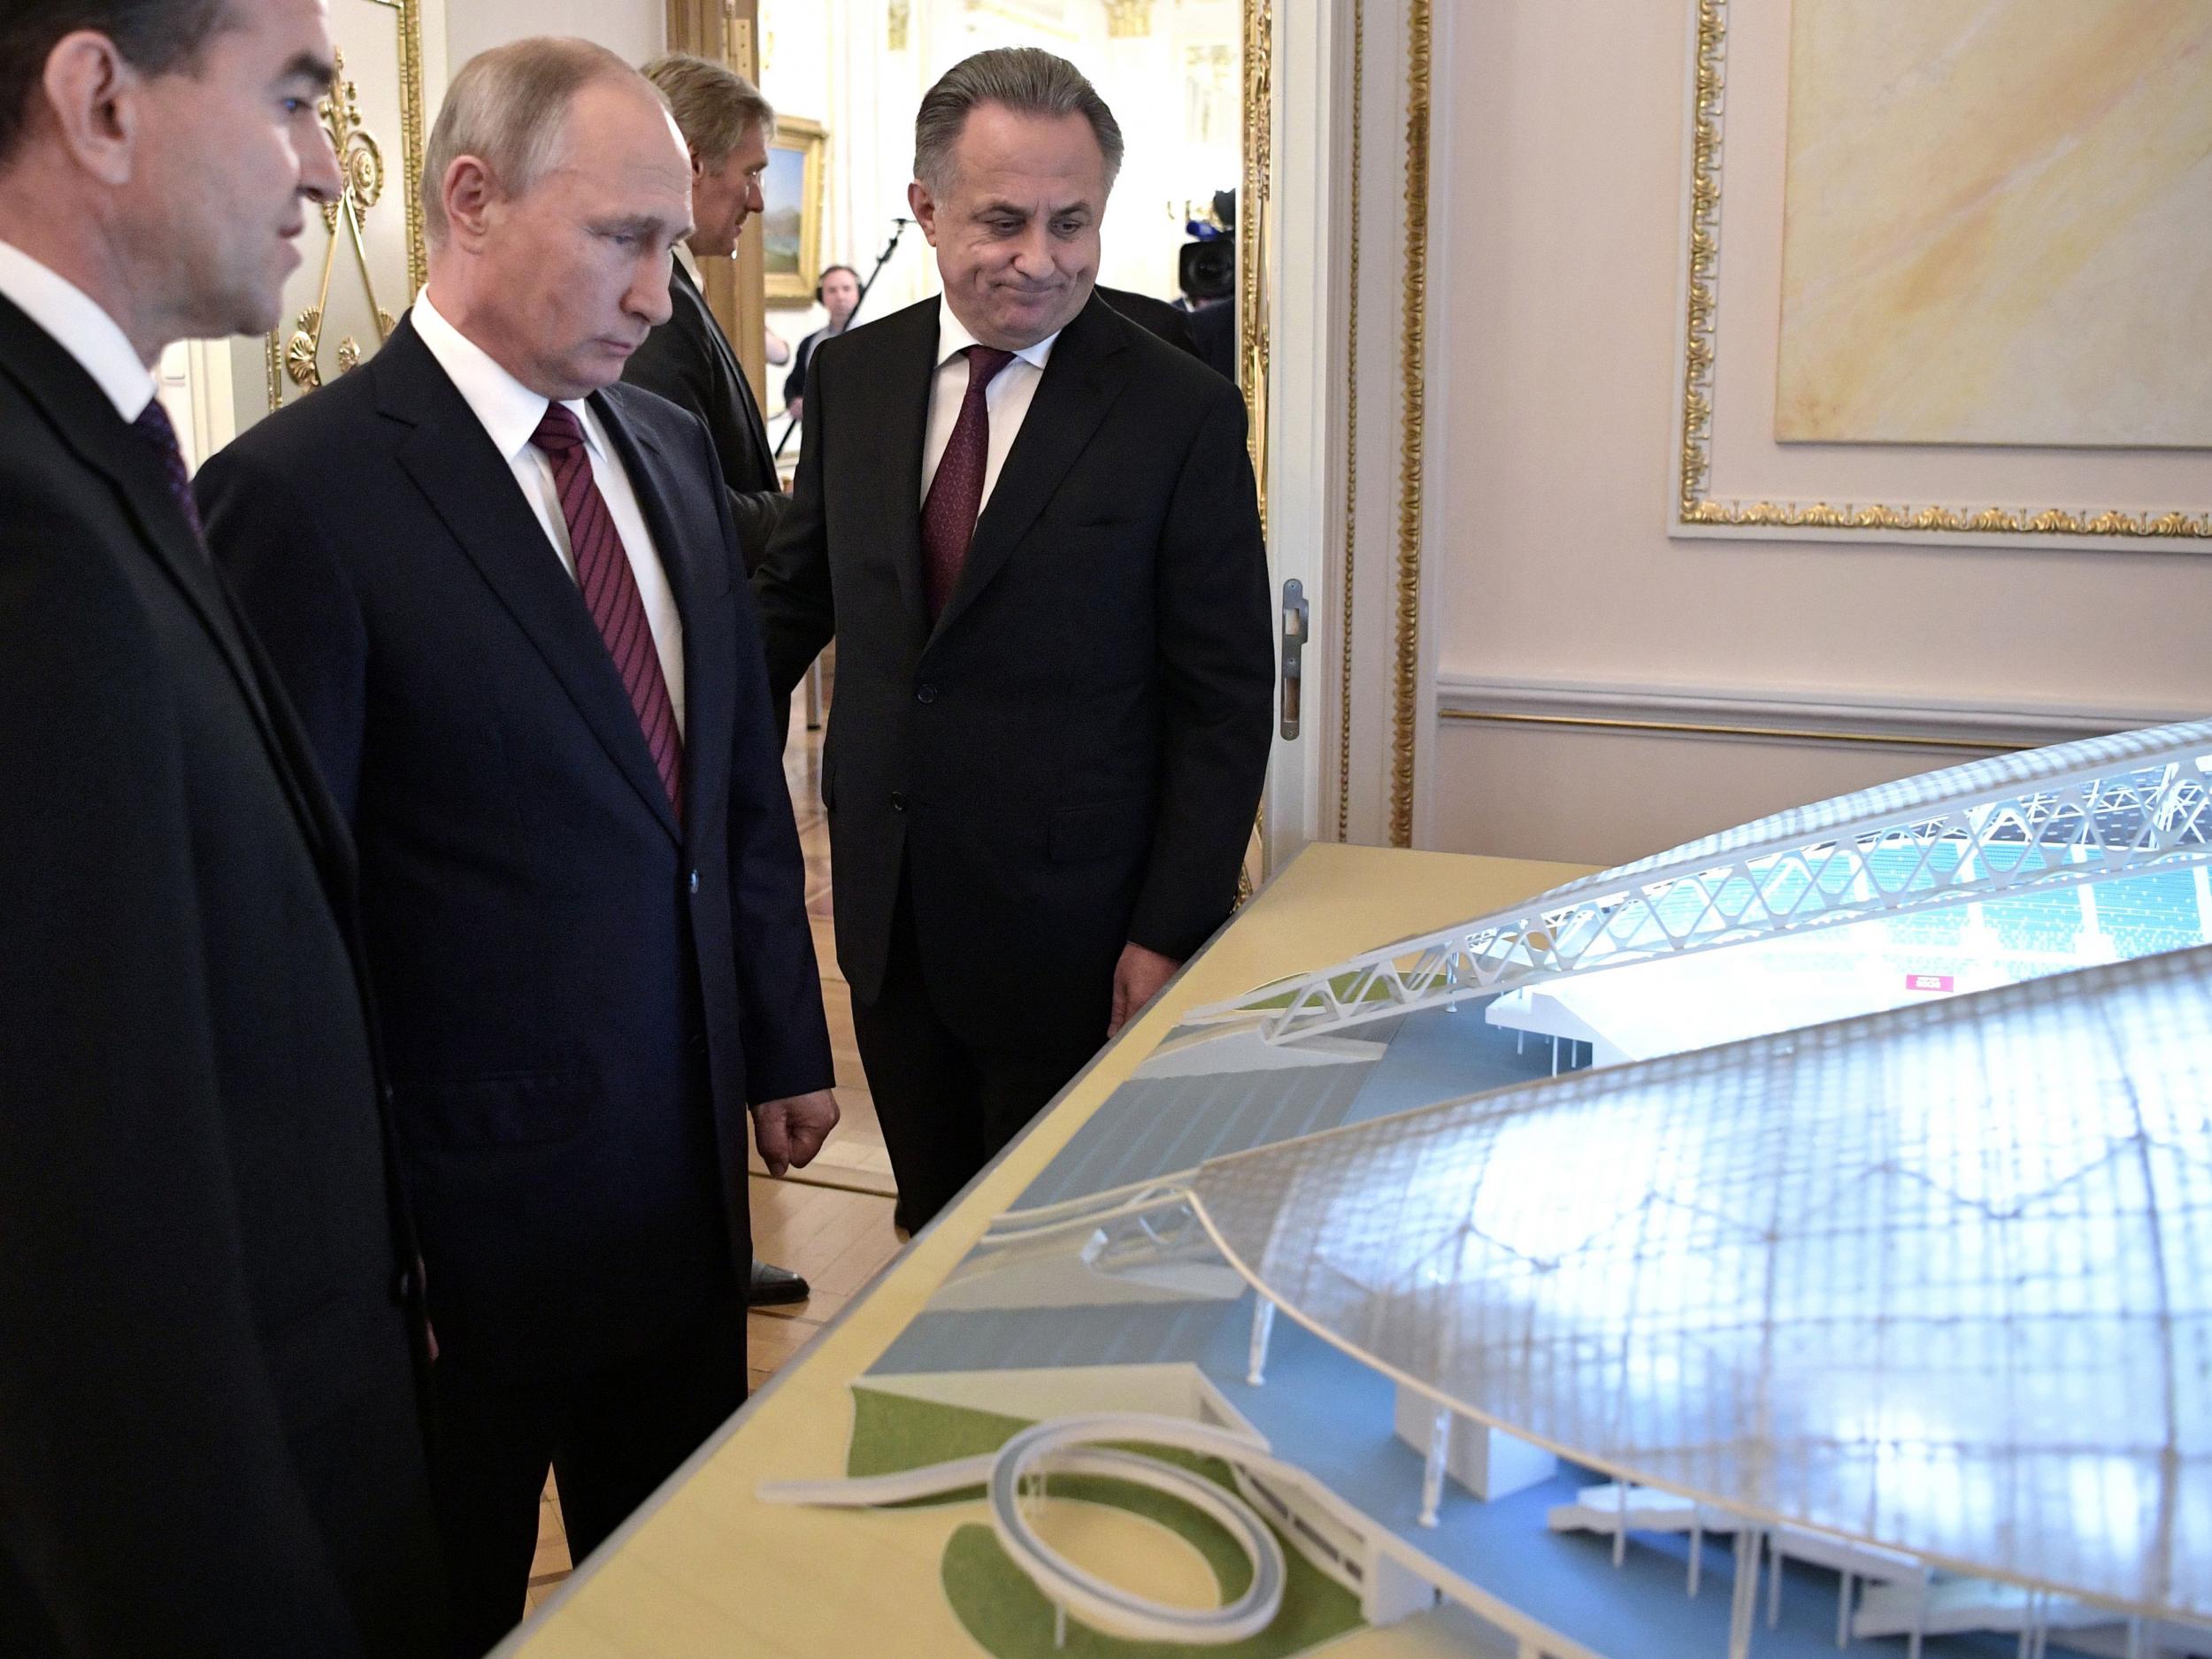 Vladimir Putin attends an exhibition on preparations for the 2018 World Cup at the Kremlin on Tuesday